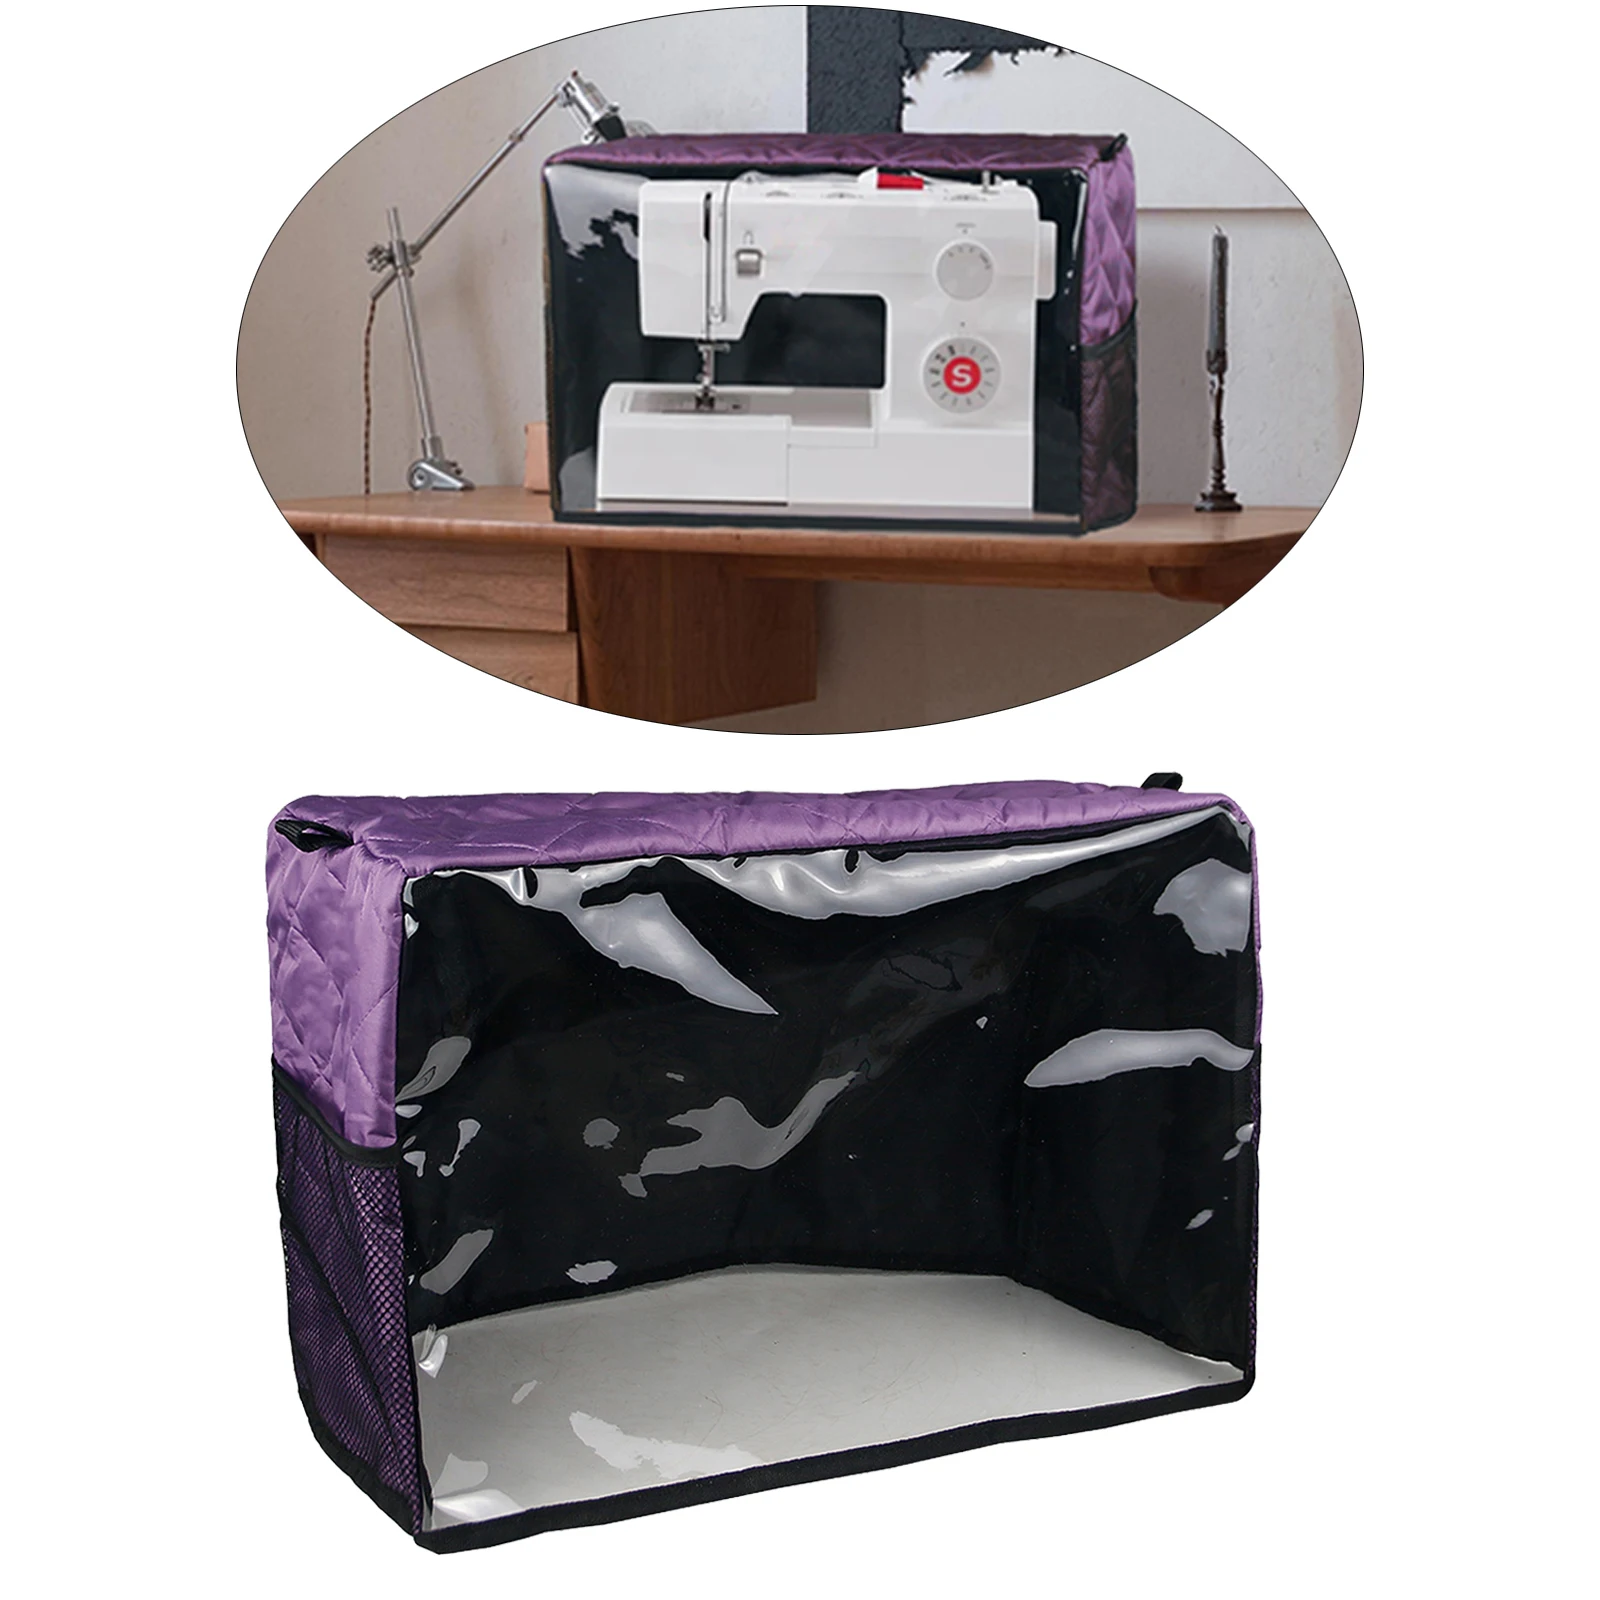 Sewing Machine Cover Protective Dust Cover Cover Pockets Dustproof for Sewing Machine Multi-functional Reusable Accessories